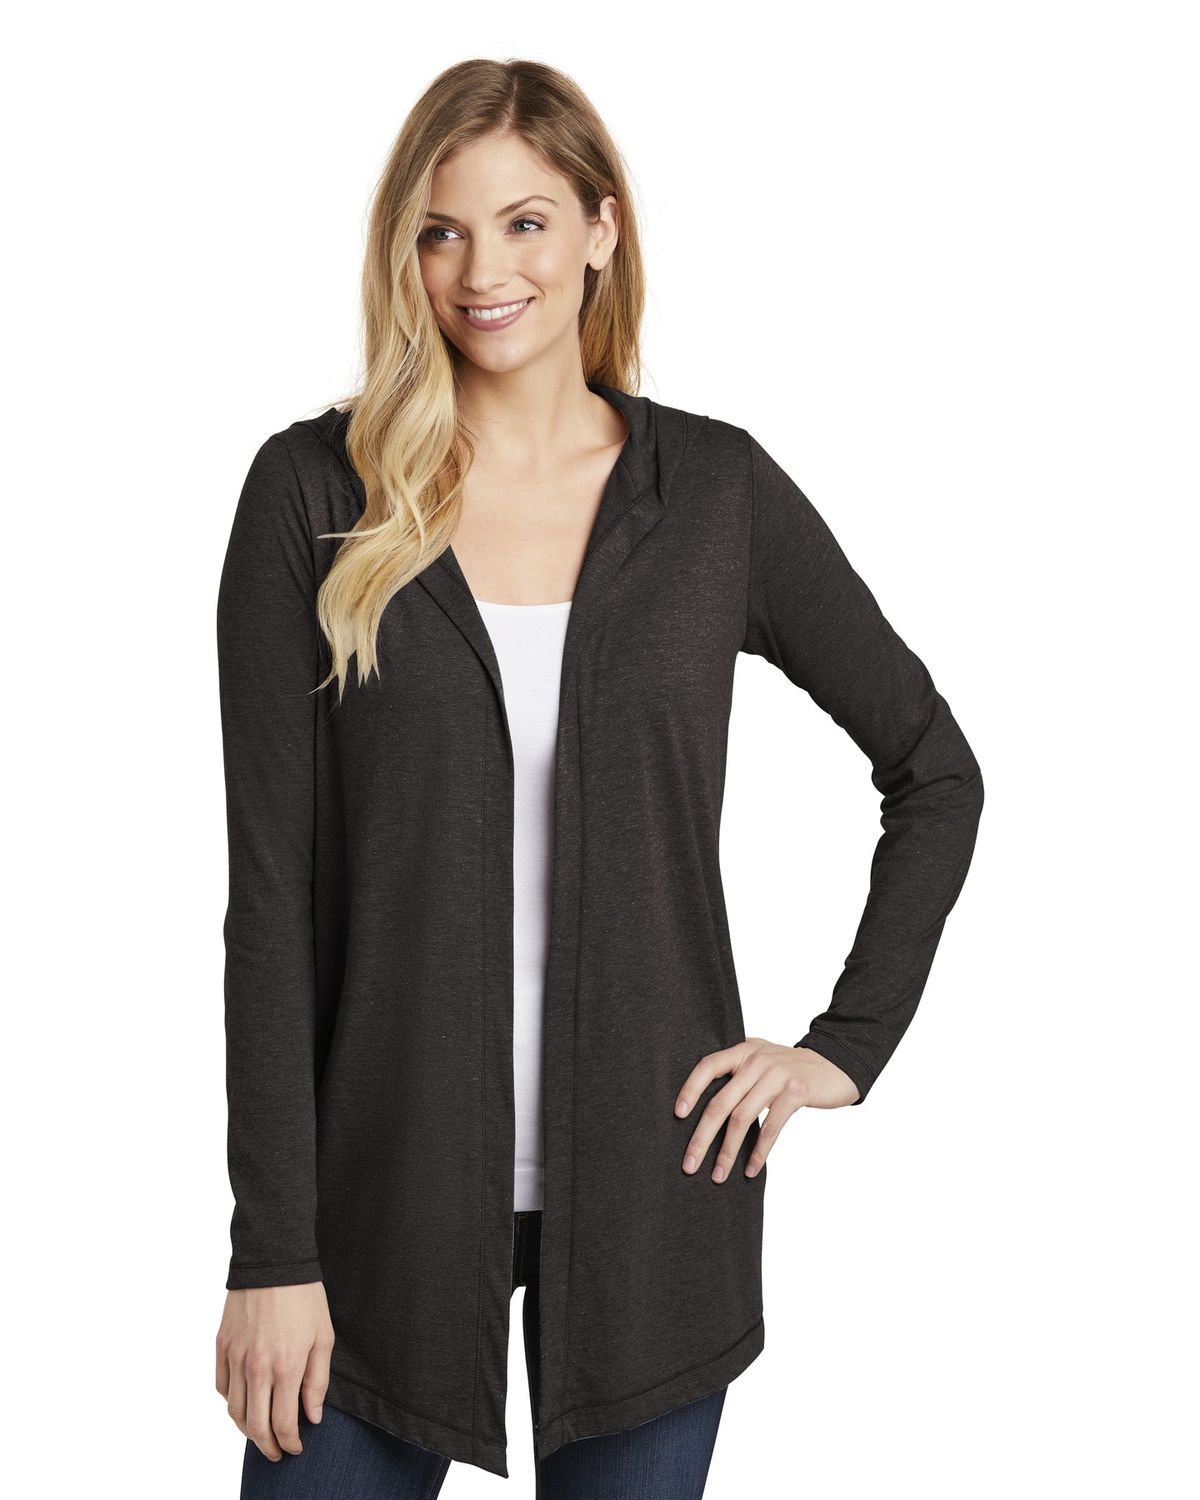 'District DT156 Women's Perfect Tri Hooded Cardigan'